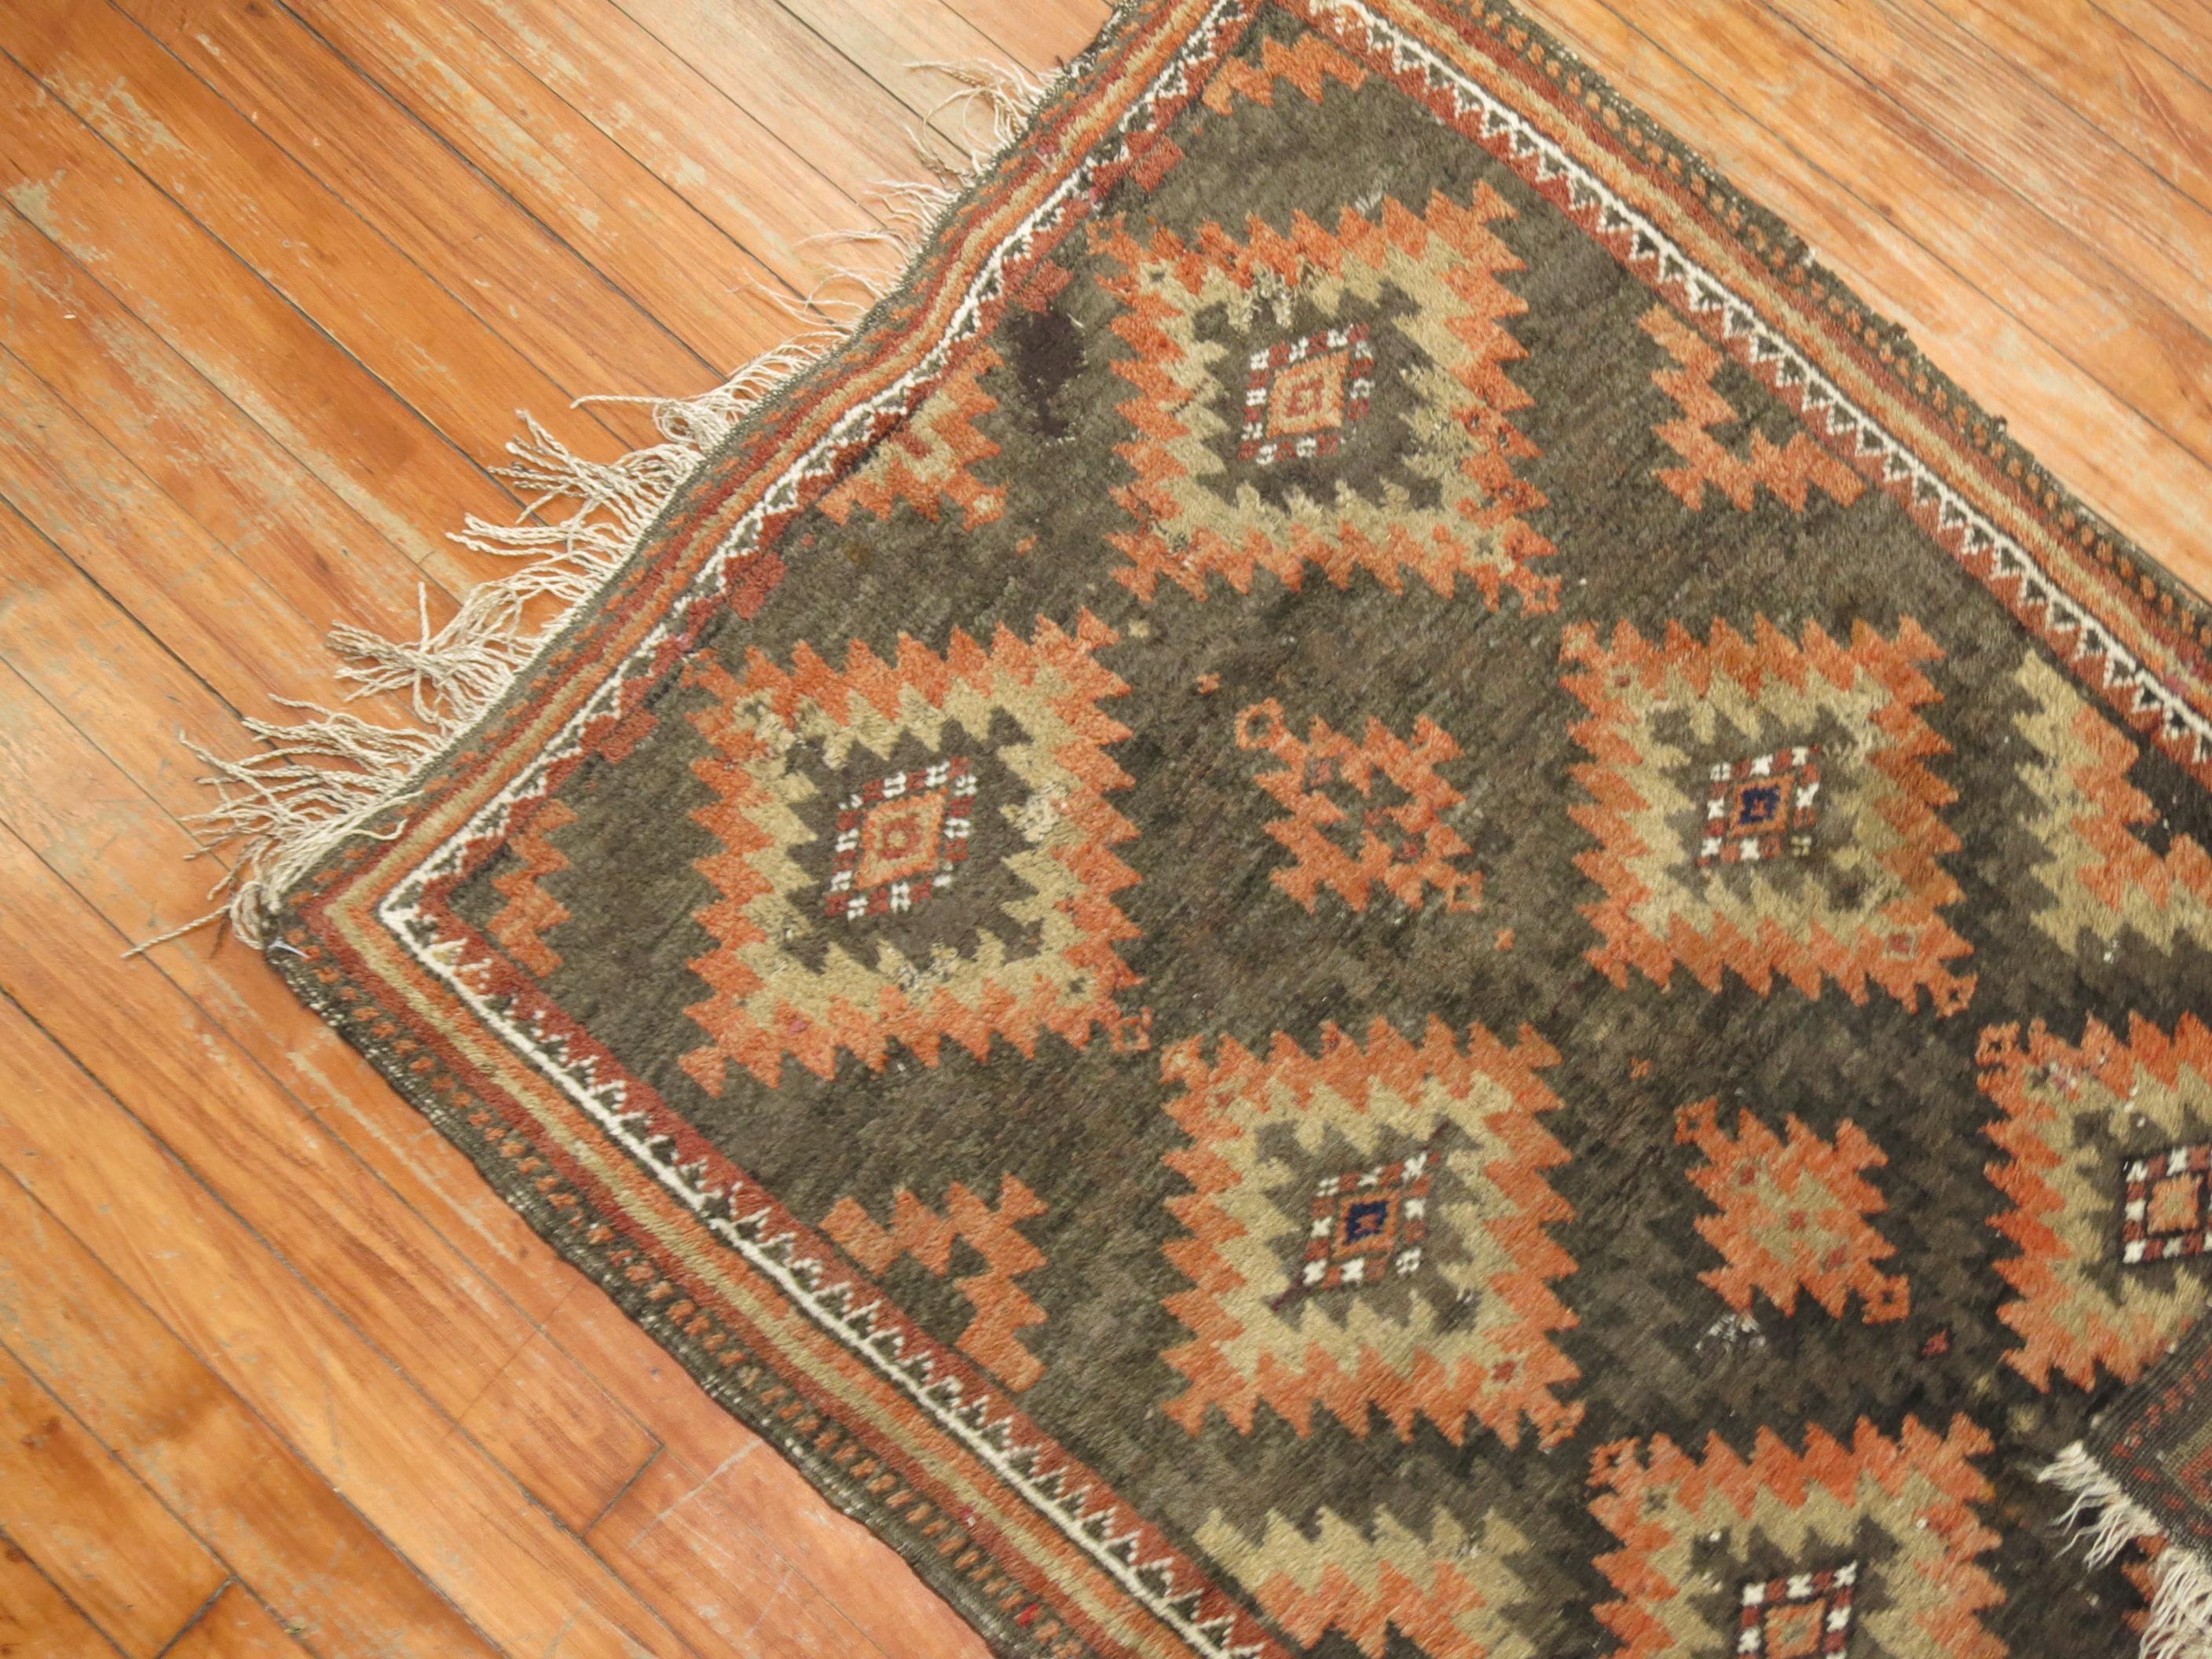 A tribal balouch rug from the early 20th century in brown and orange accents, circa 1930

Measures: 2'6” x 3'10”.